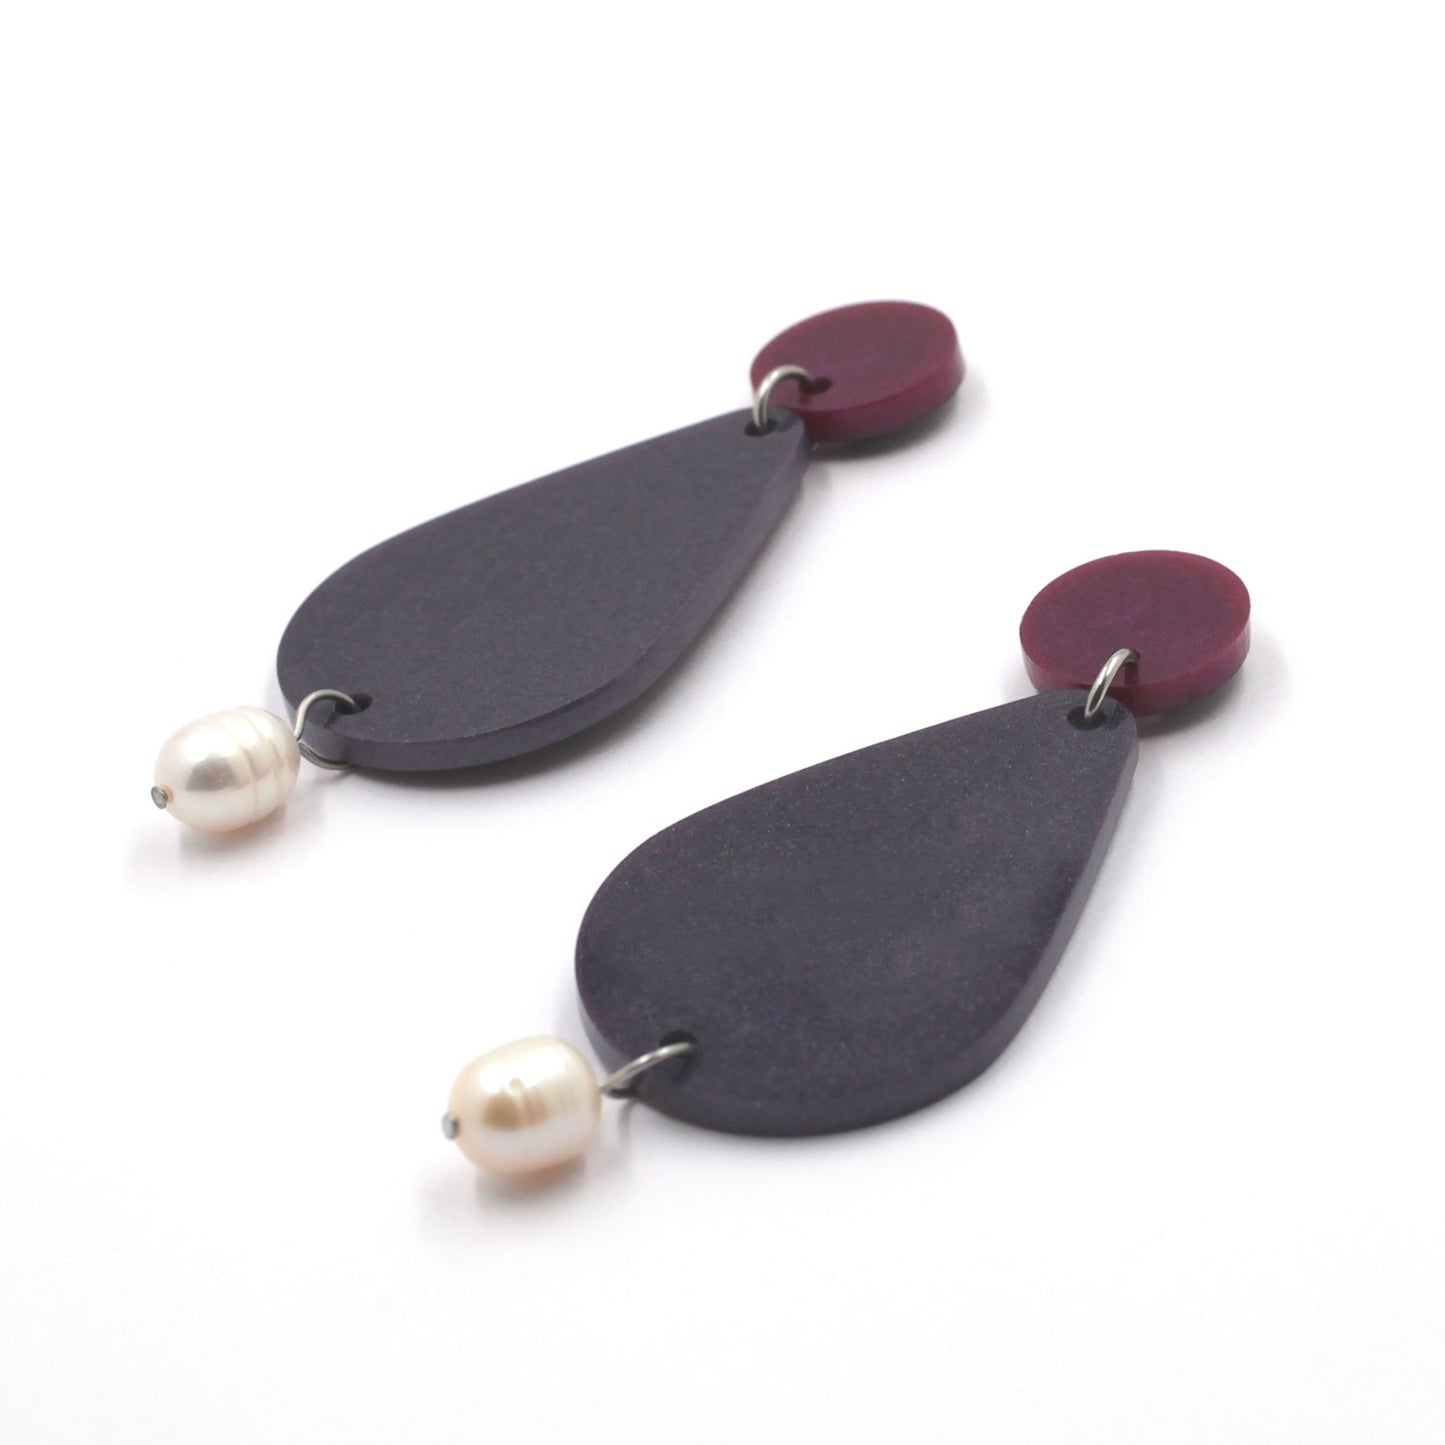 picture of earrings on a white background. the earrings are composed by a pink dot at the top, then a bigger purple pear shape and a freshwater pearls at the bottom hanging.